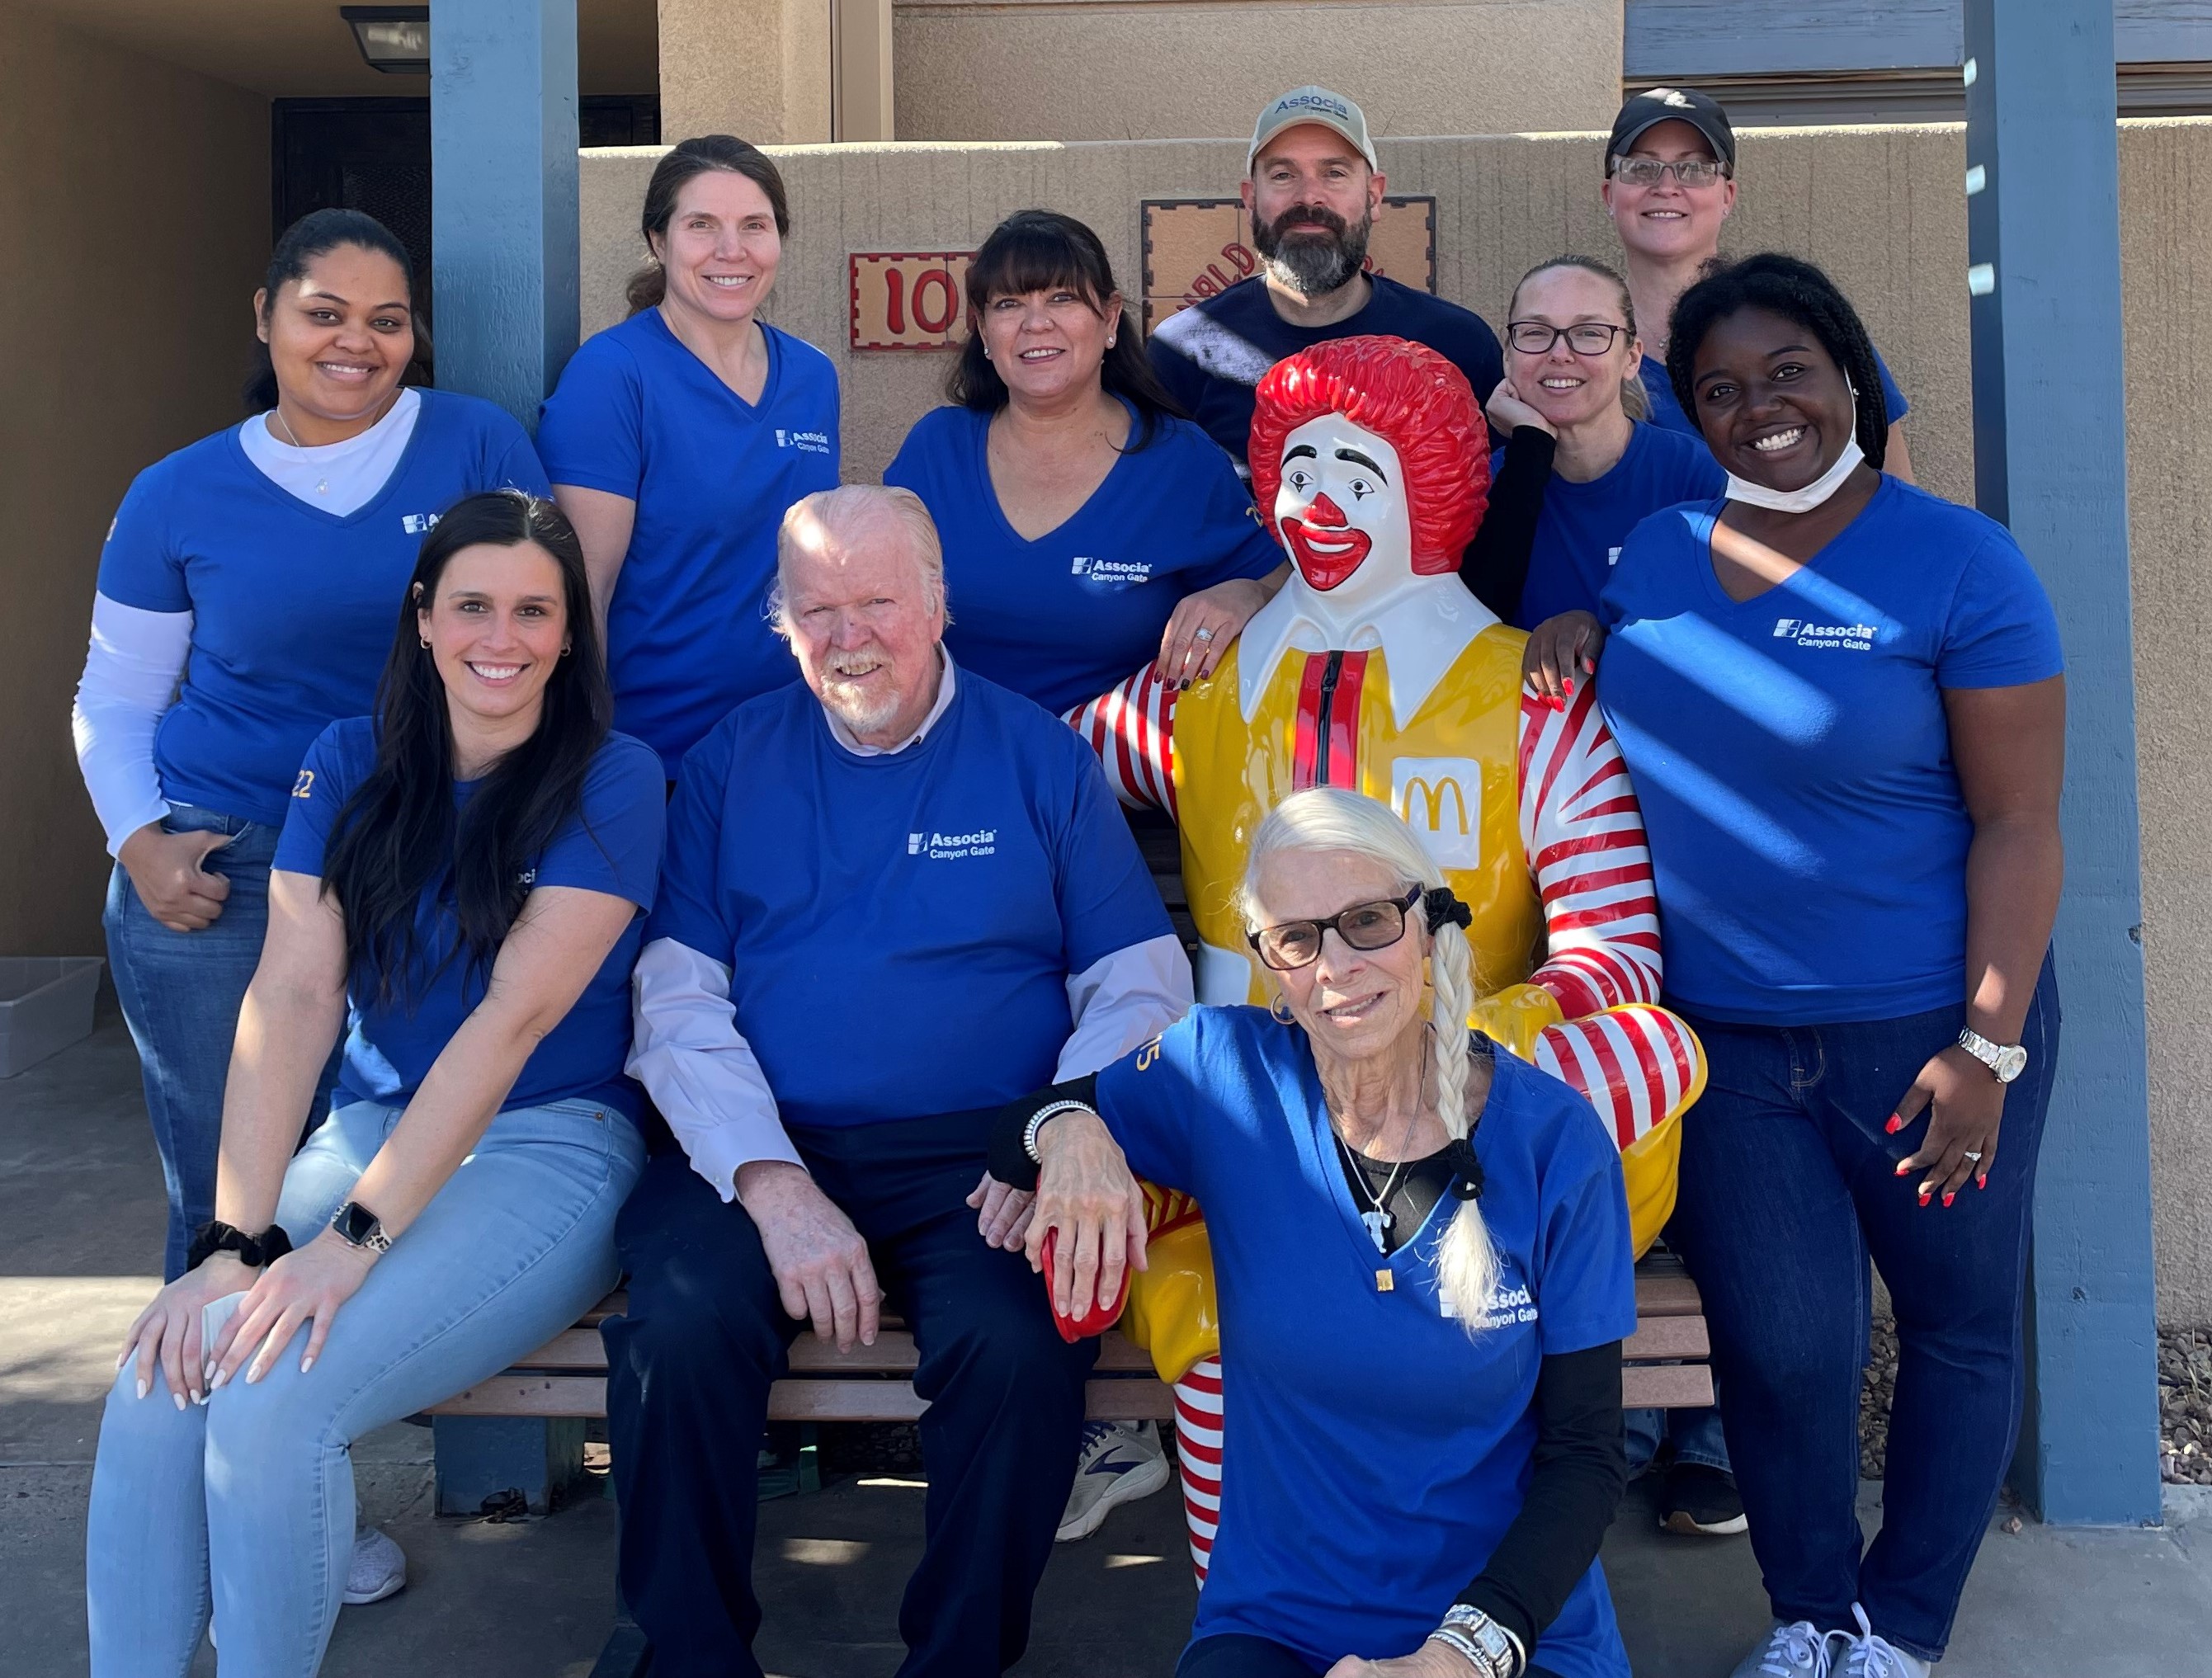 Associa Canyon Gate volunteers at Ronald McDonald House to help those in need.